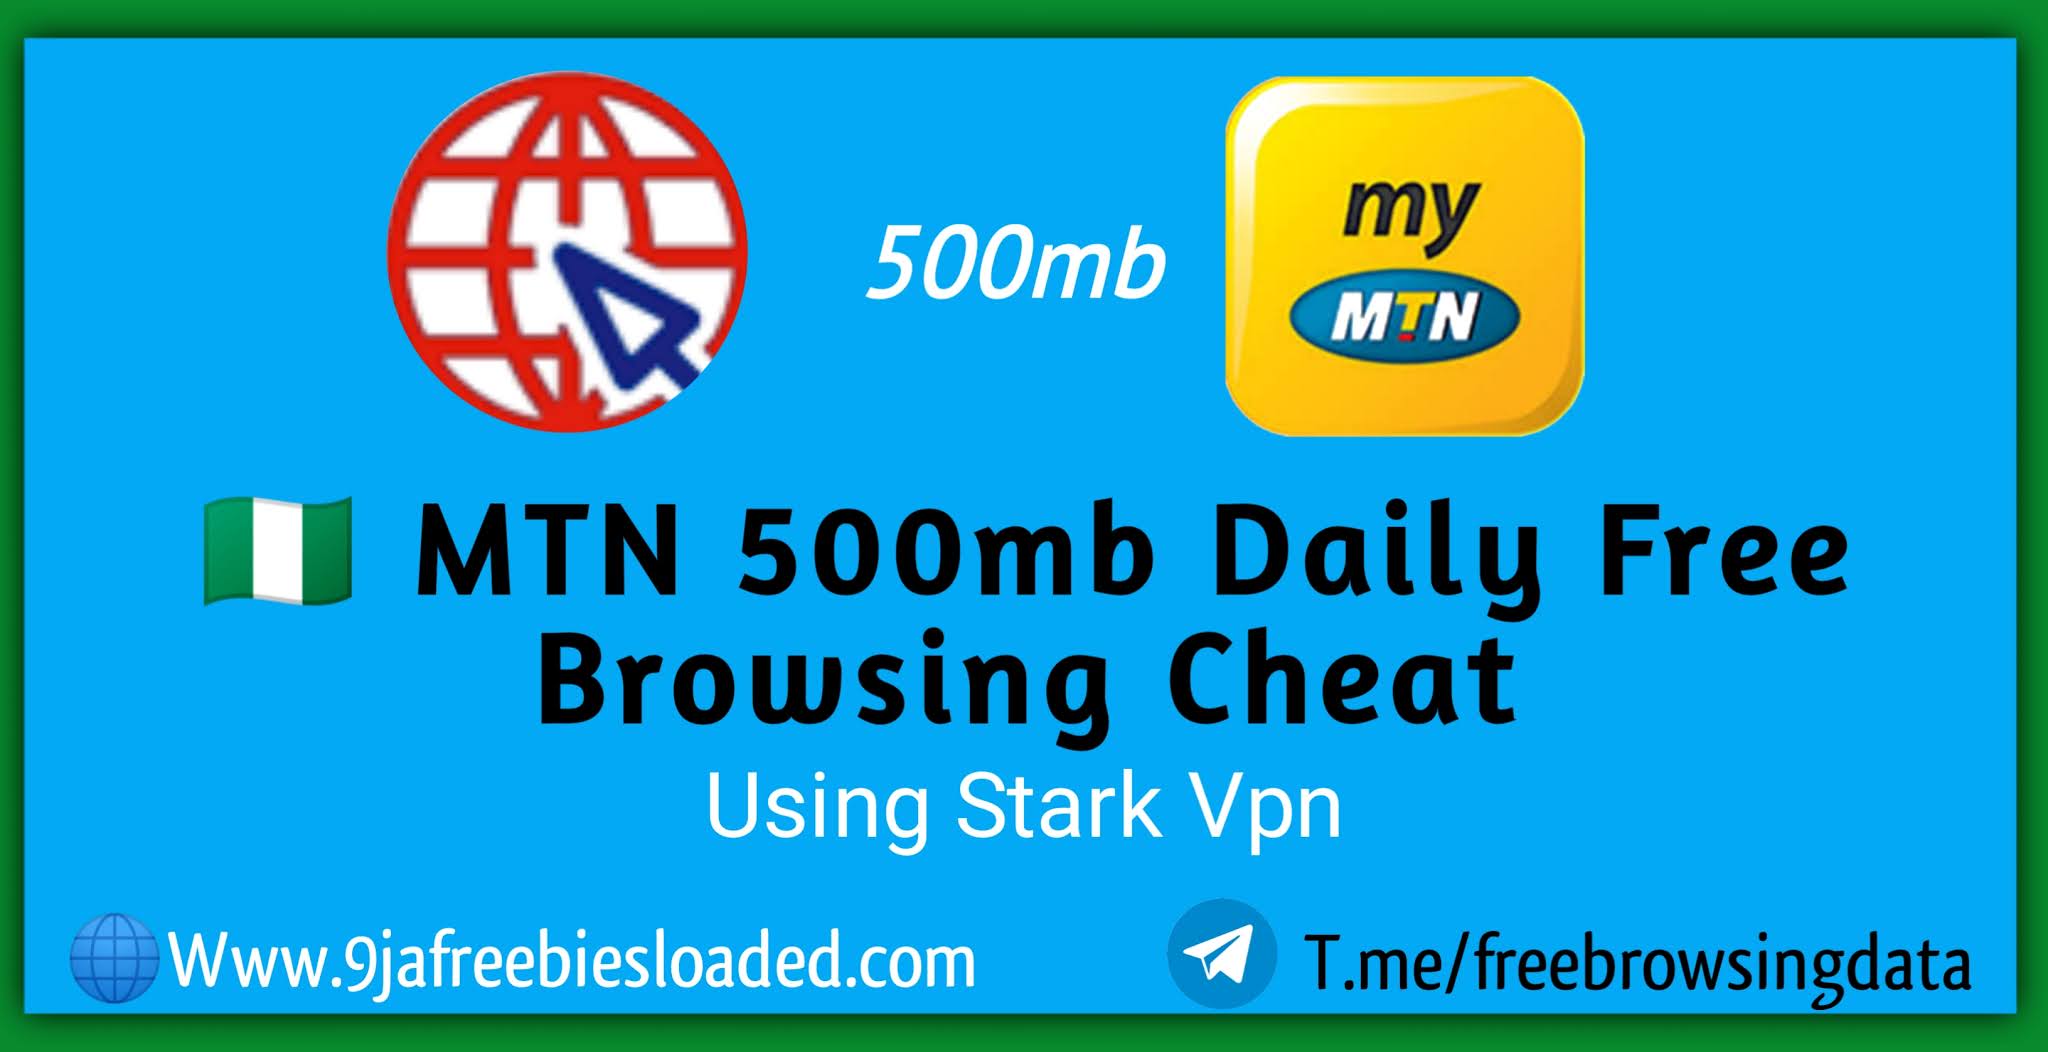 How To Activate MTN 500mb Daily Using Stark Vpn